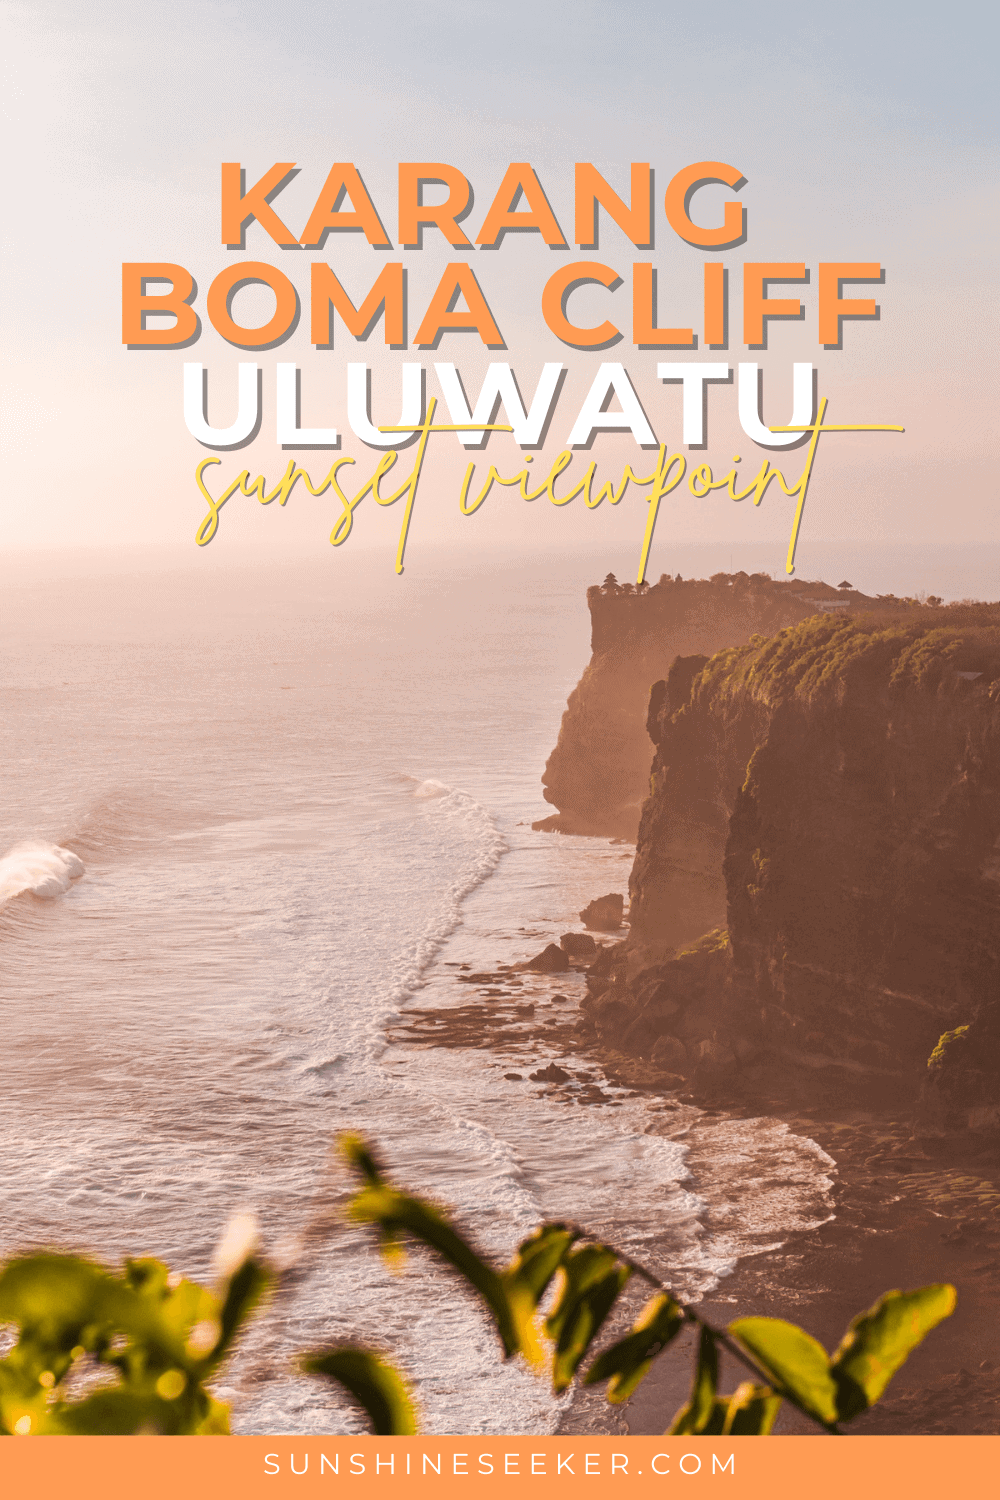 Don't miss the incredible sunset viewpoint Karang Boma Cliff in Uluwatu, Bali. How to get there, what to expect + photography tips. Karang Boma Cliff, the best sunset in Uluwatu.